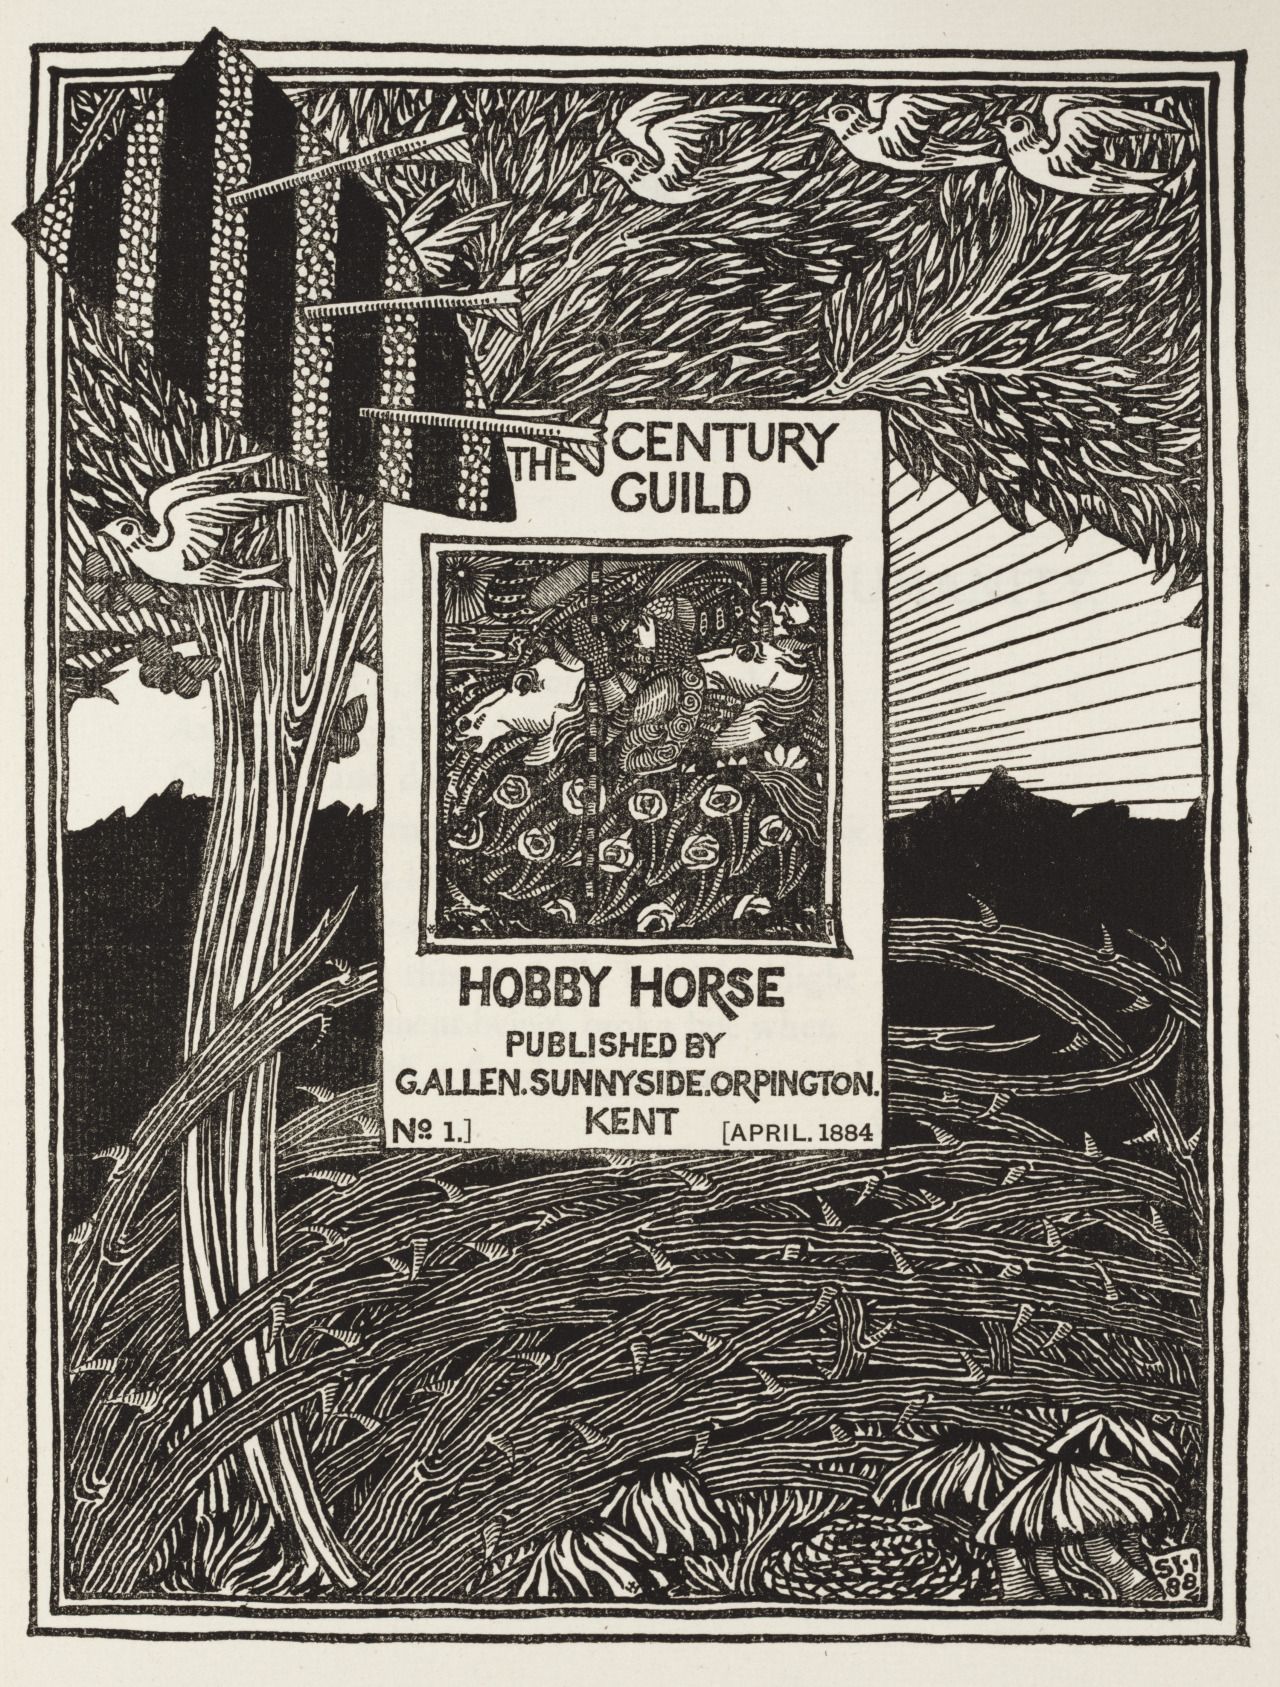 A binding by Selwyn Image for 'The Century Guild Hobby Horse'